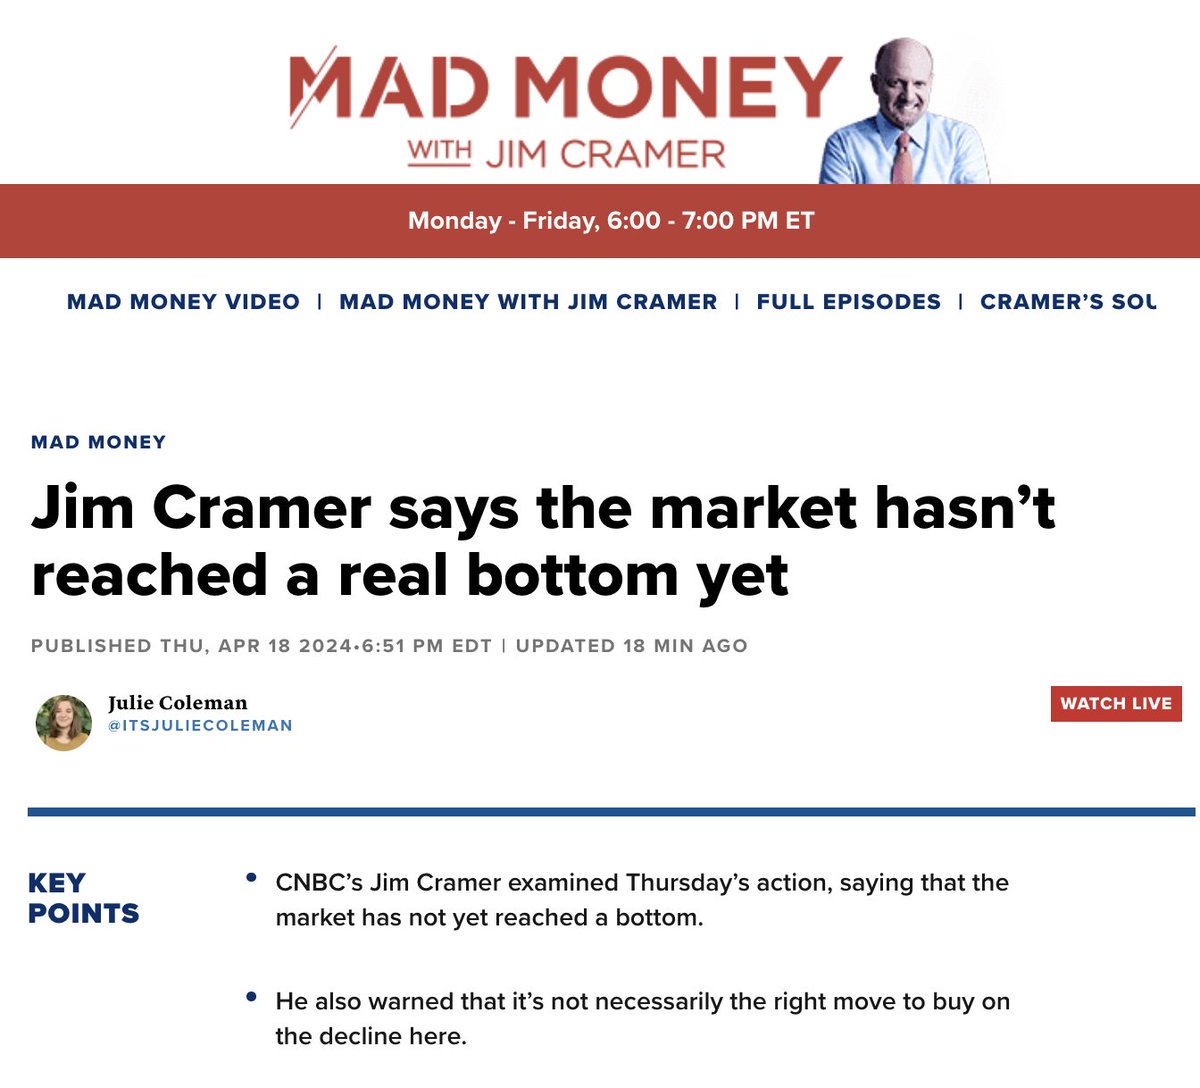 JIM CRAMER JUST SAID THE STOCK MARKET HASN'T REACHED A REAL BOTTOM YET - CNBC